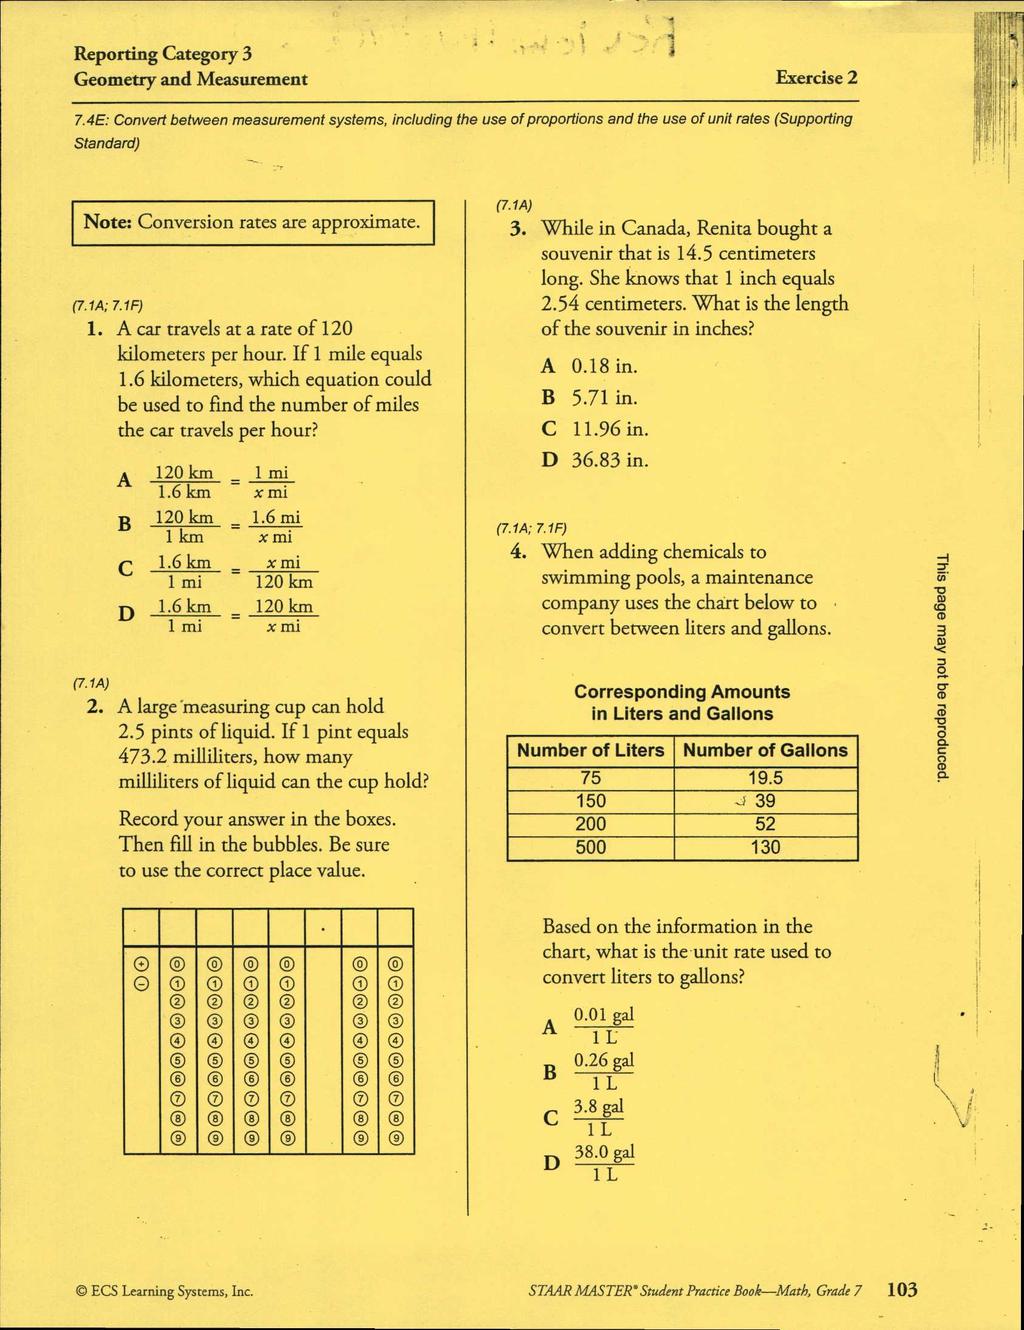 Geometry and Measurement Exercise 2 7.4E: Convert between measurement systems, including the use of proportions and the use of unit rates (Supporting Standard) Note: Conversion rates are approximate.